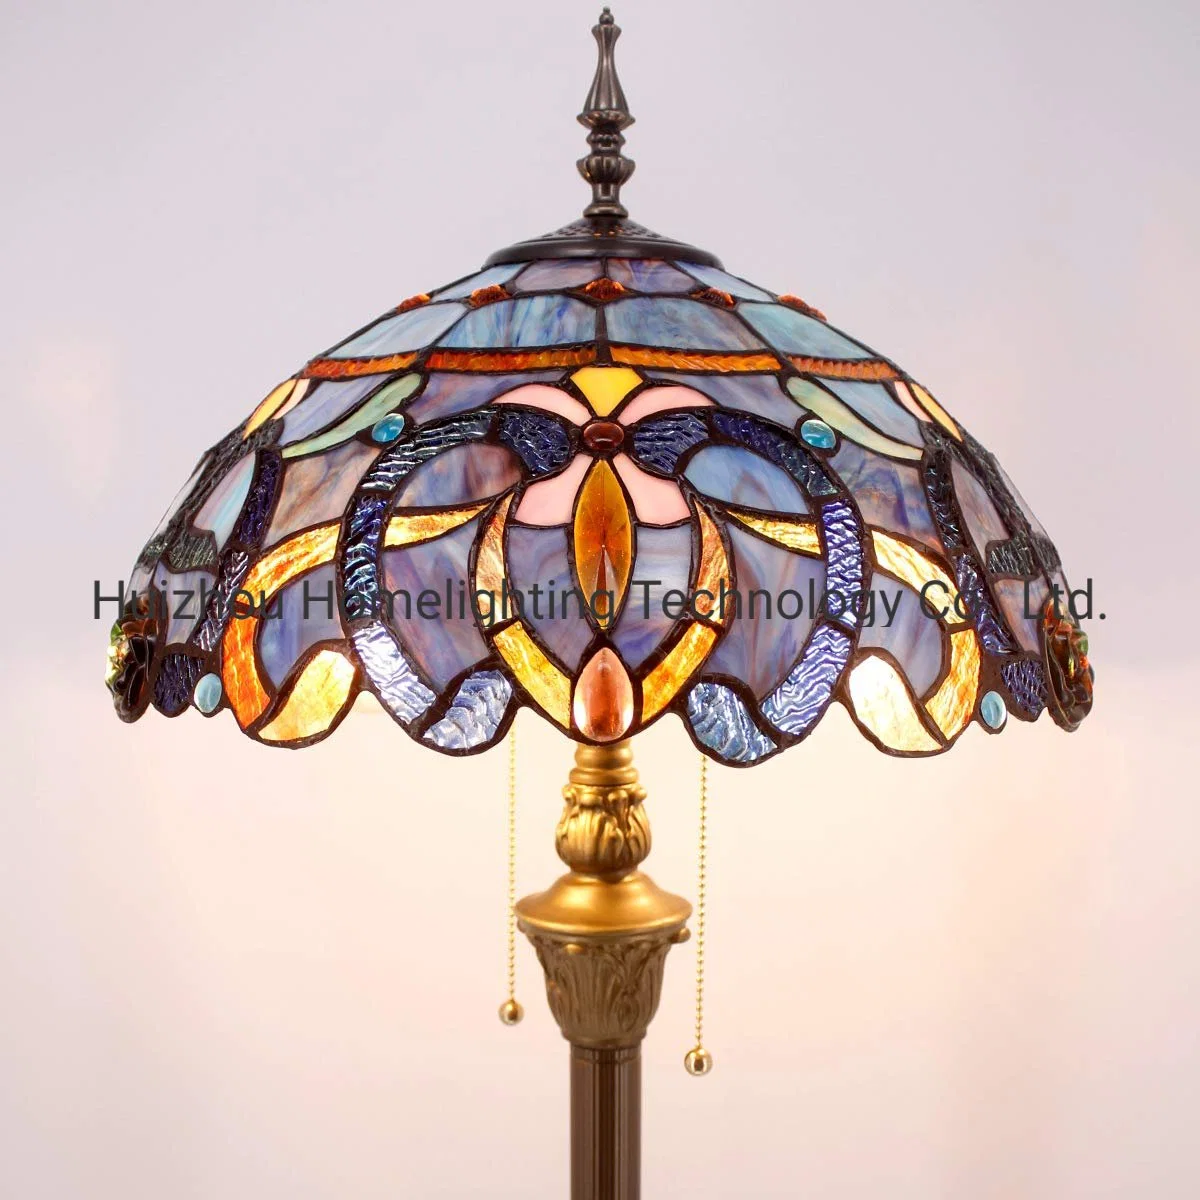 Tff-8771 Tiffany Style Floor Lamp Stained Glass Blue Purple Cloudly